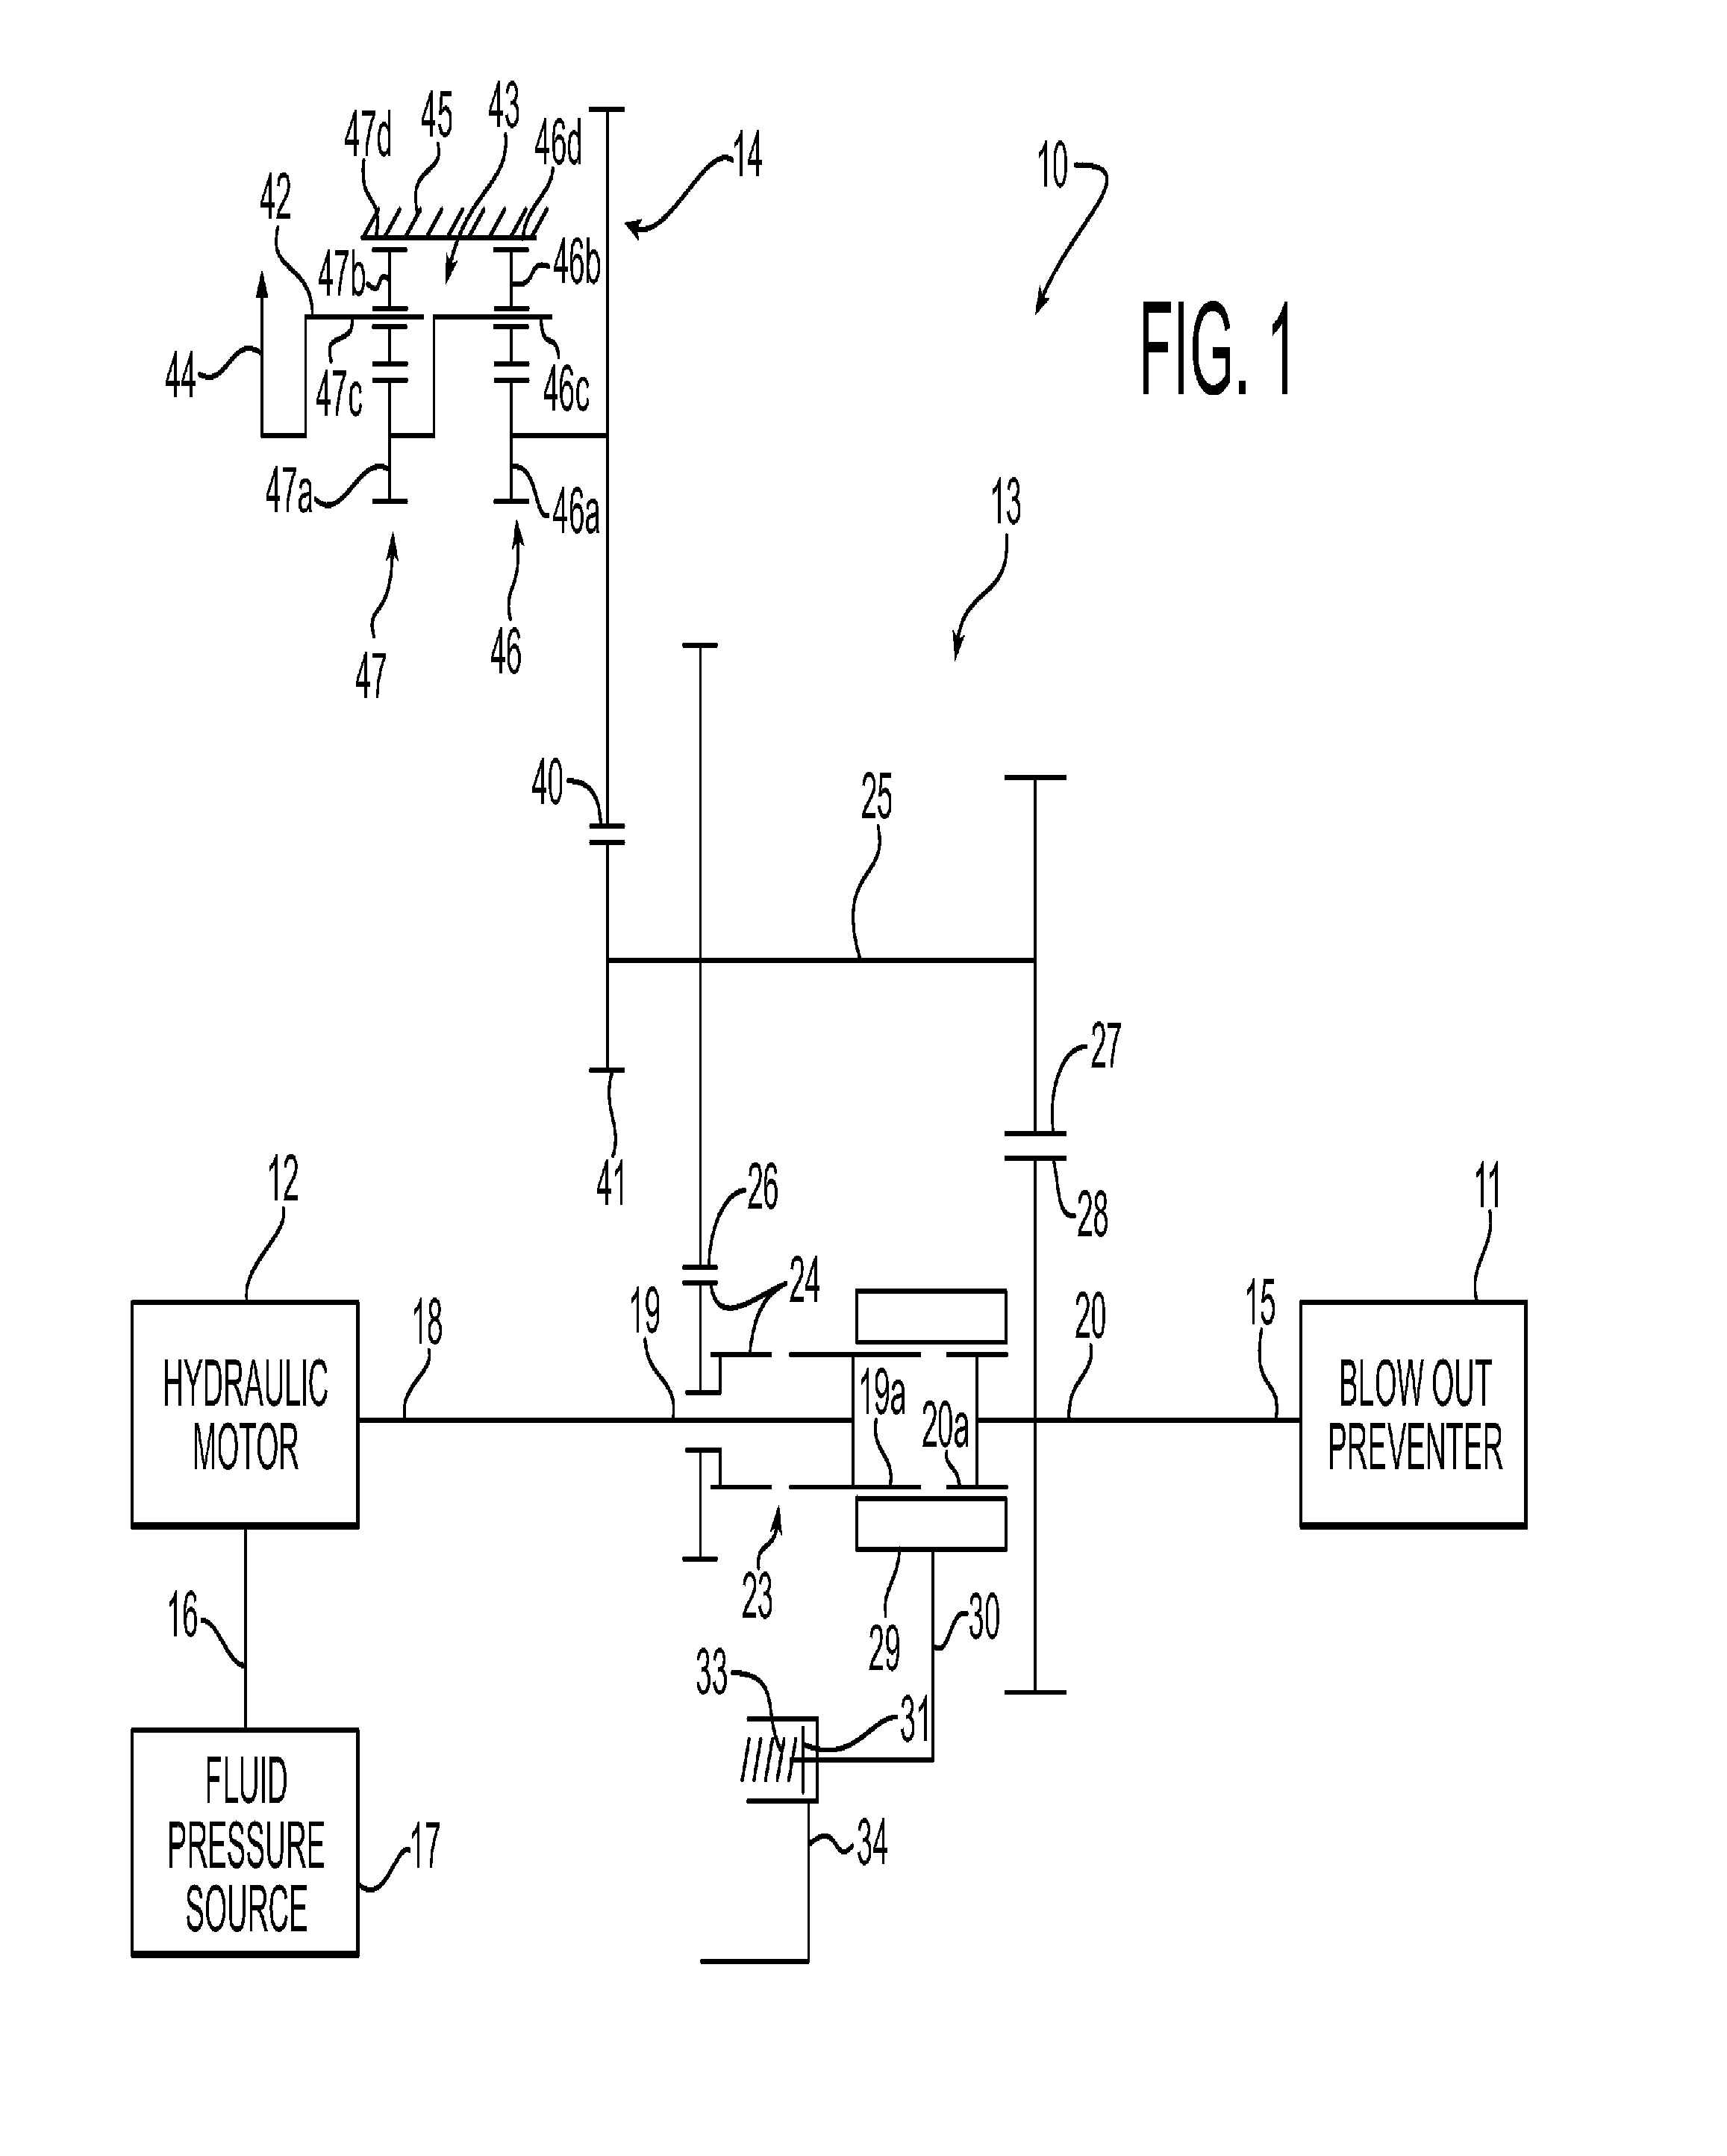 Actuator Provided with a Gear Box, Position Indicator for a Gear Box, and Related Methods